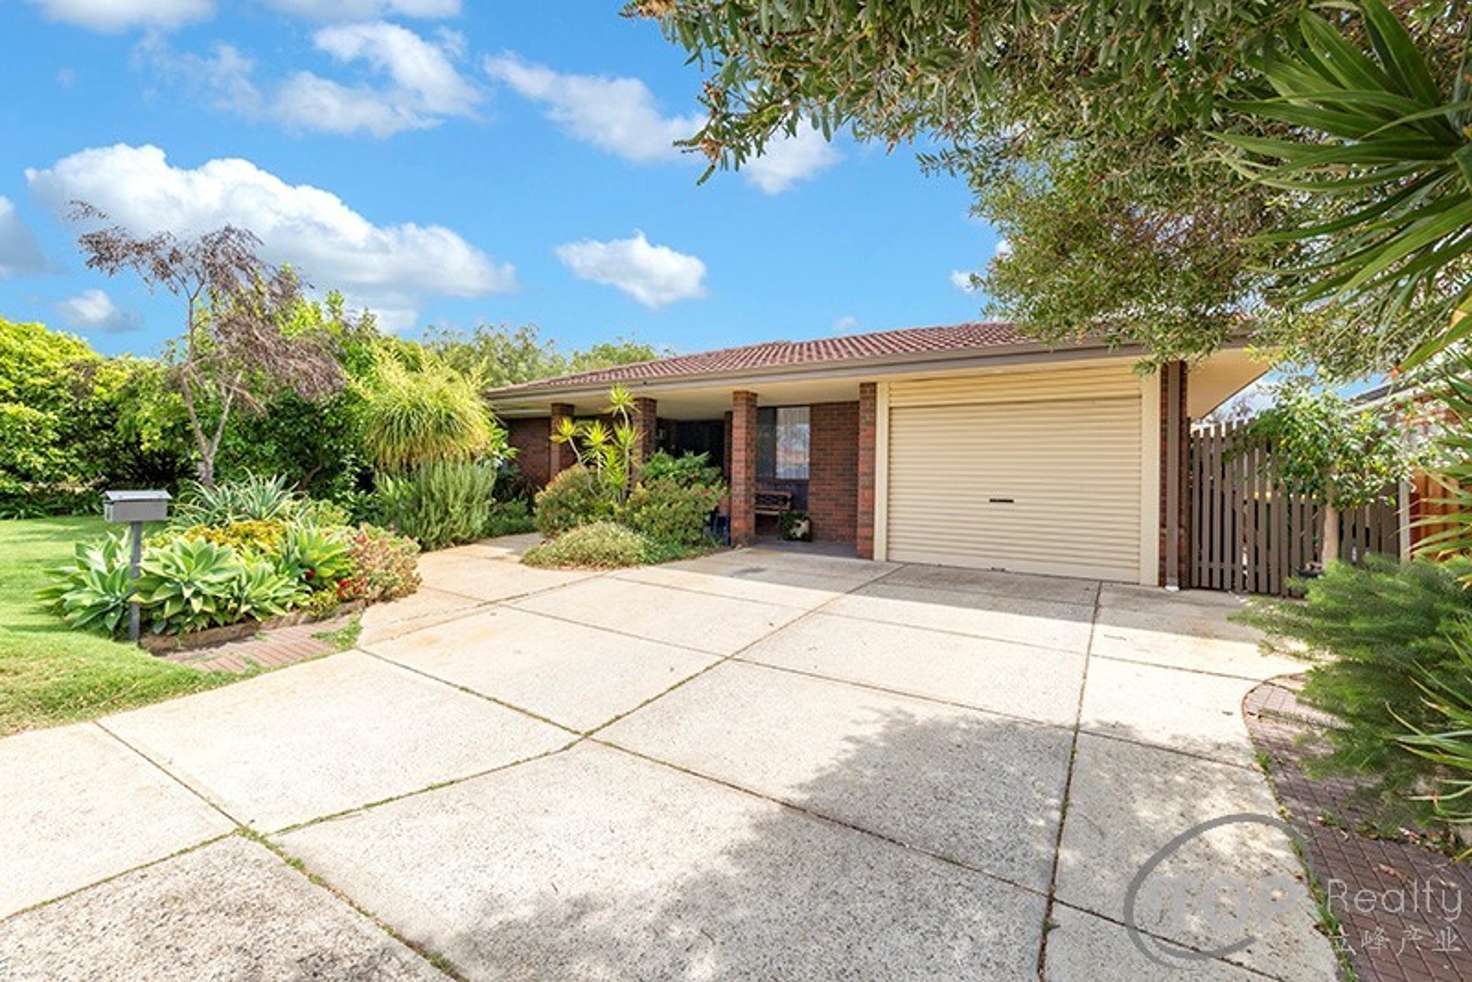 Main view of Homely house listing, 6 Macarthur Ct, Willetton WA 6155